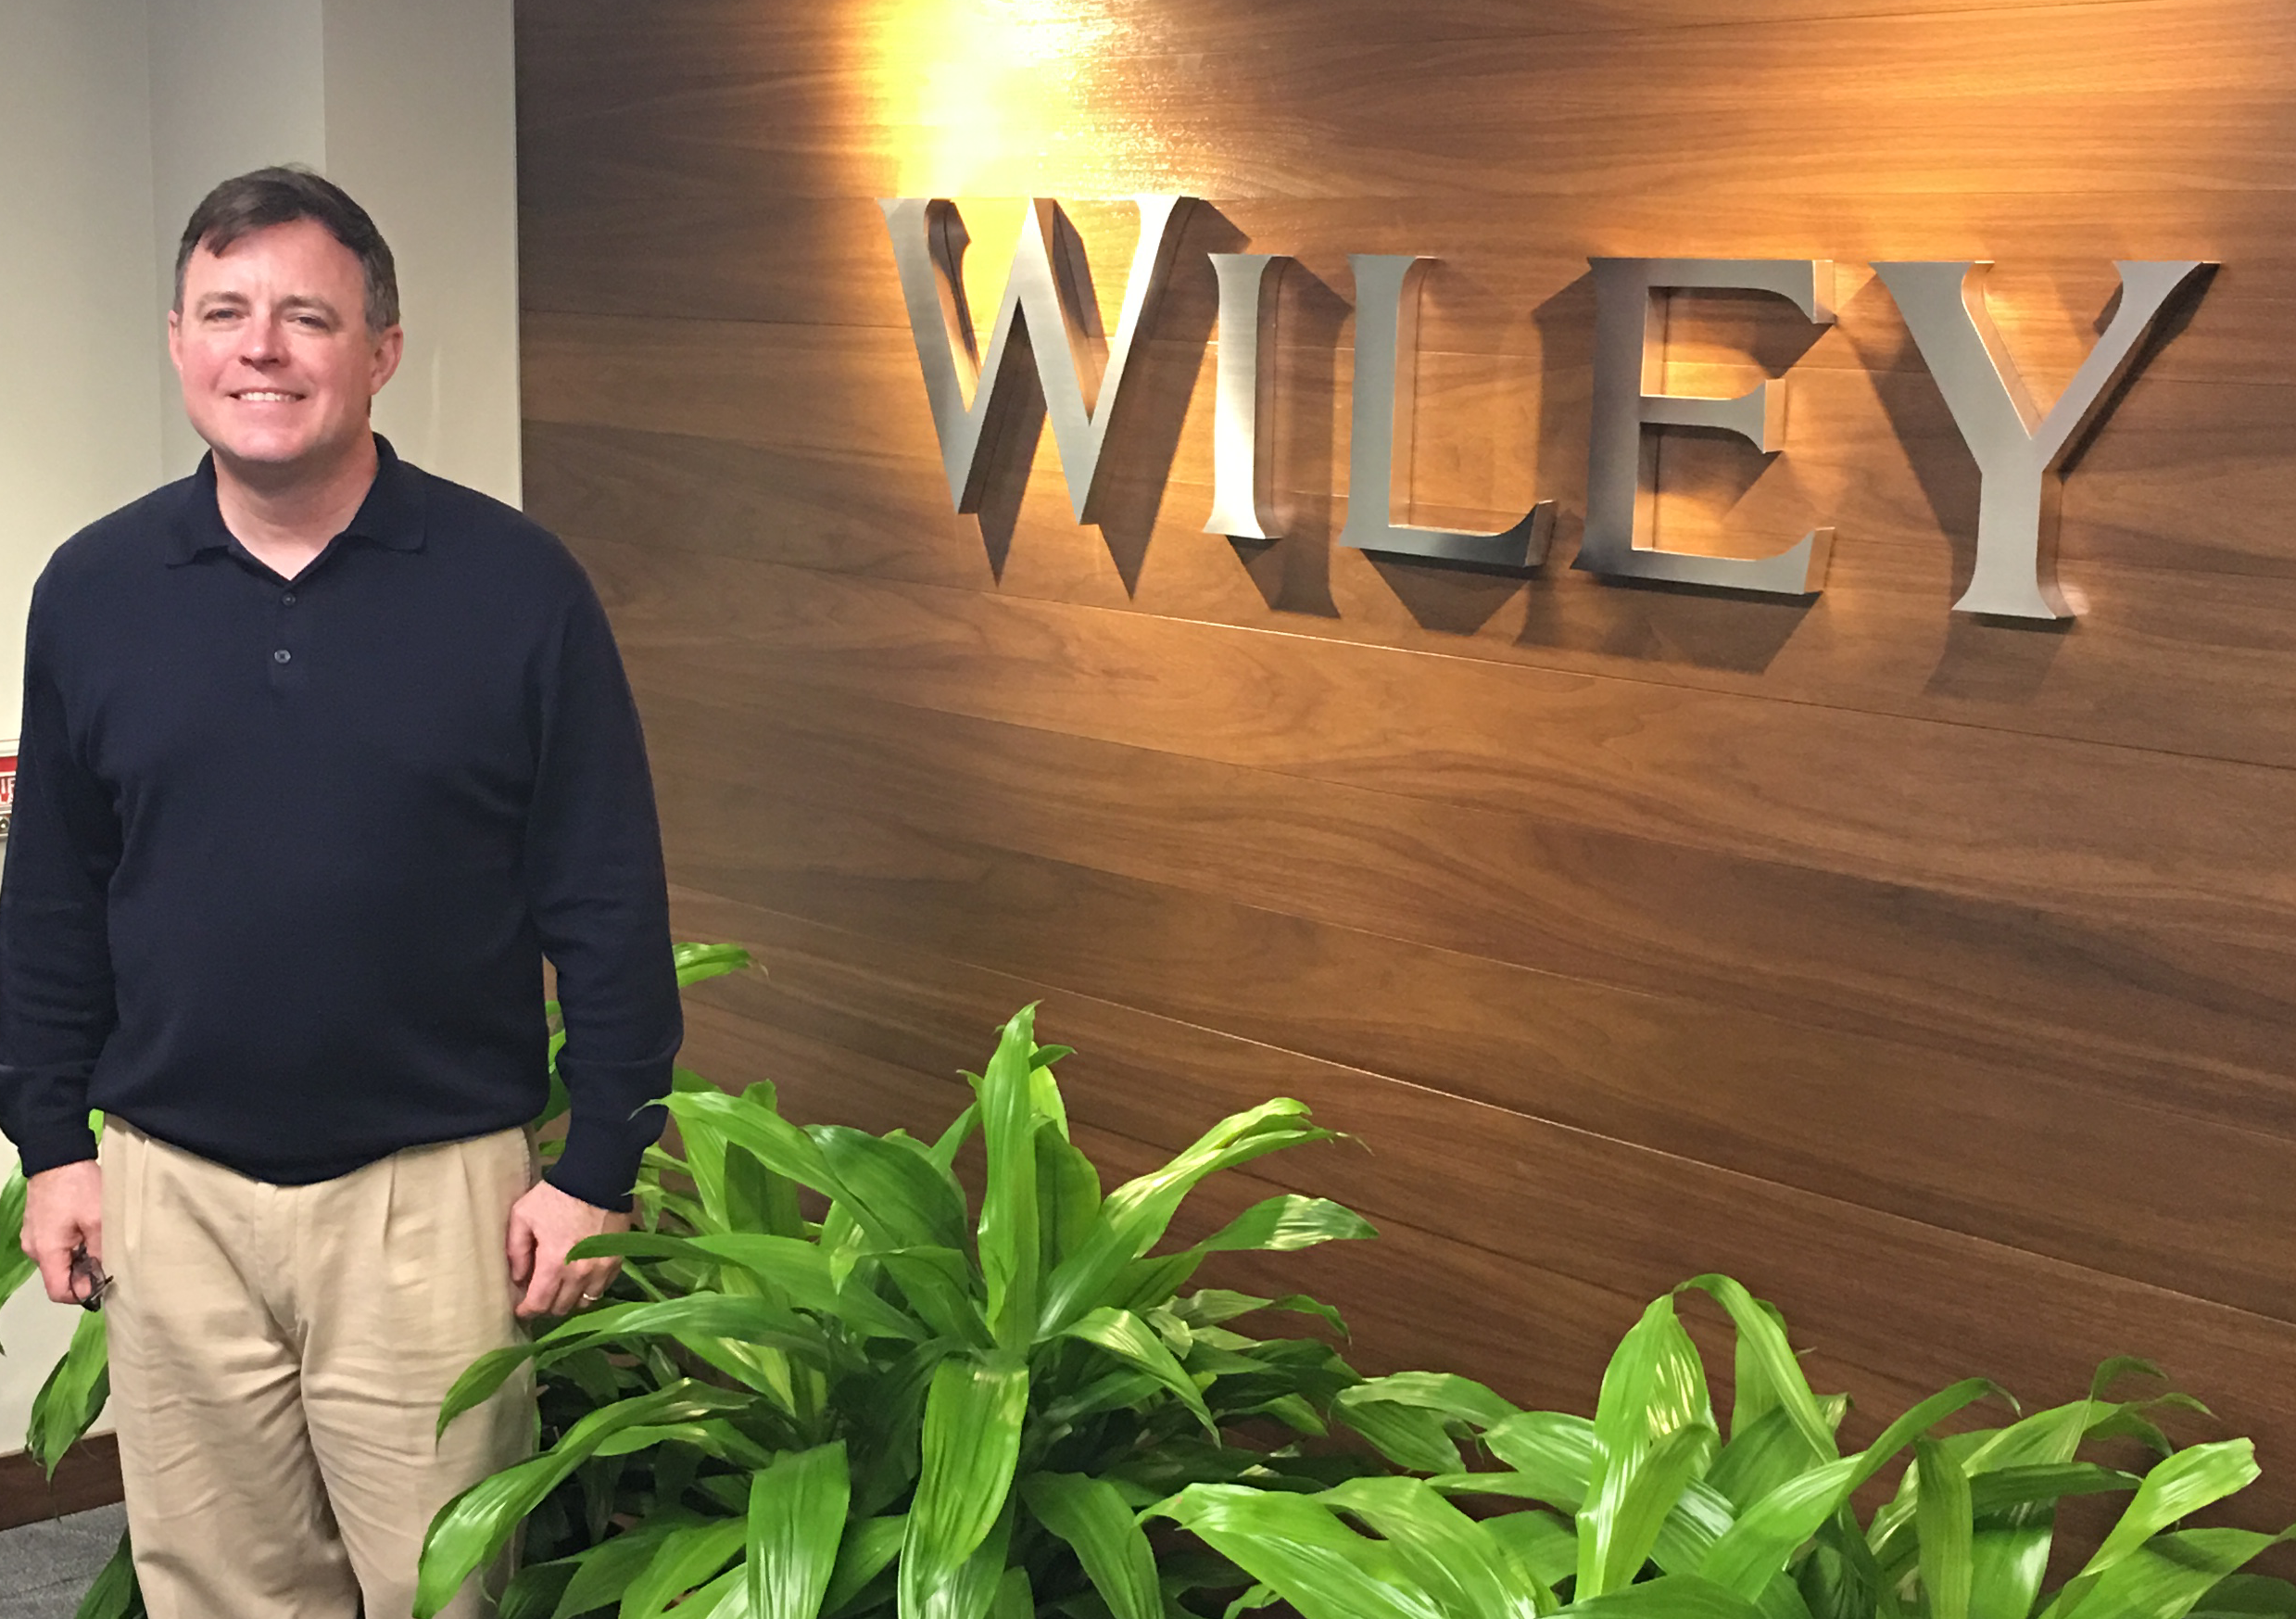 Everything DiSC® Training at Wiley